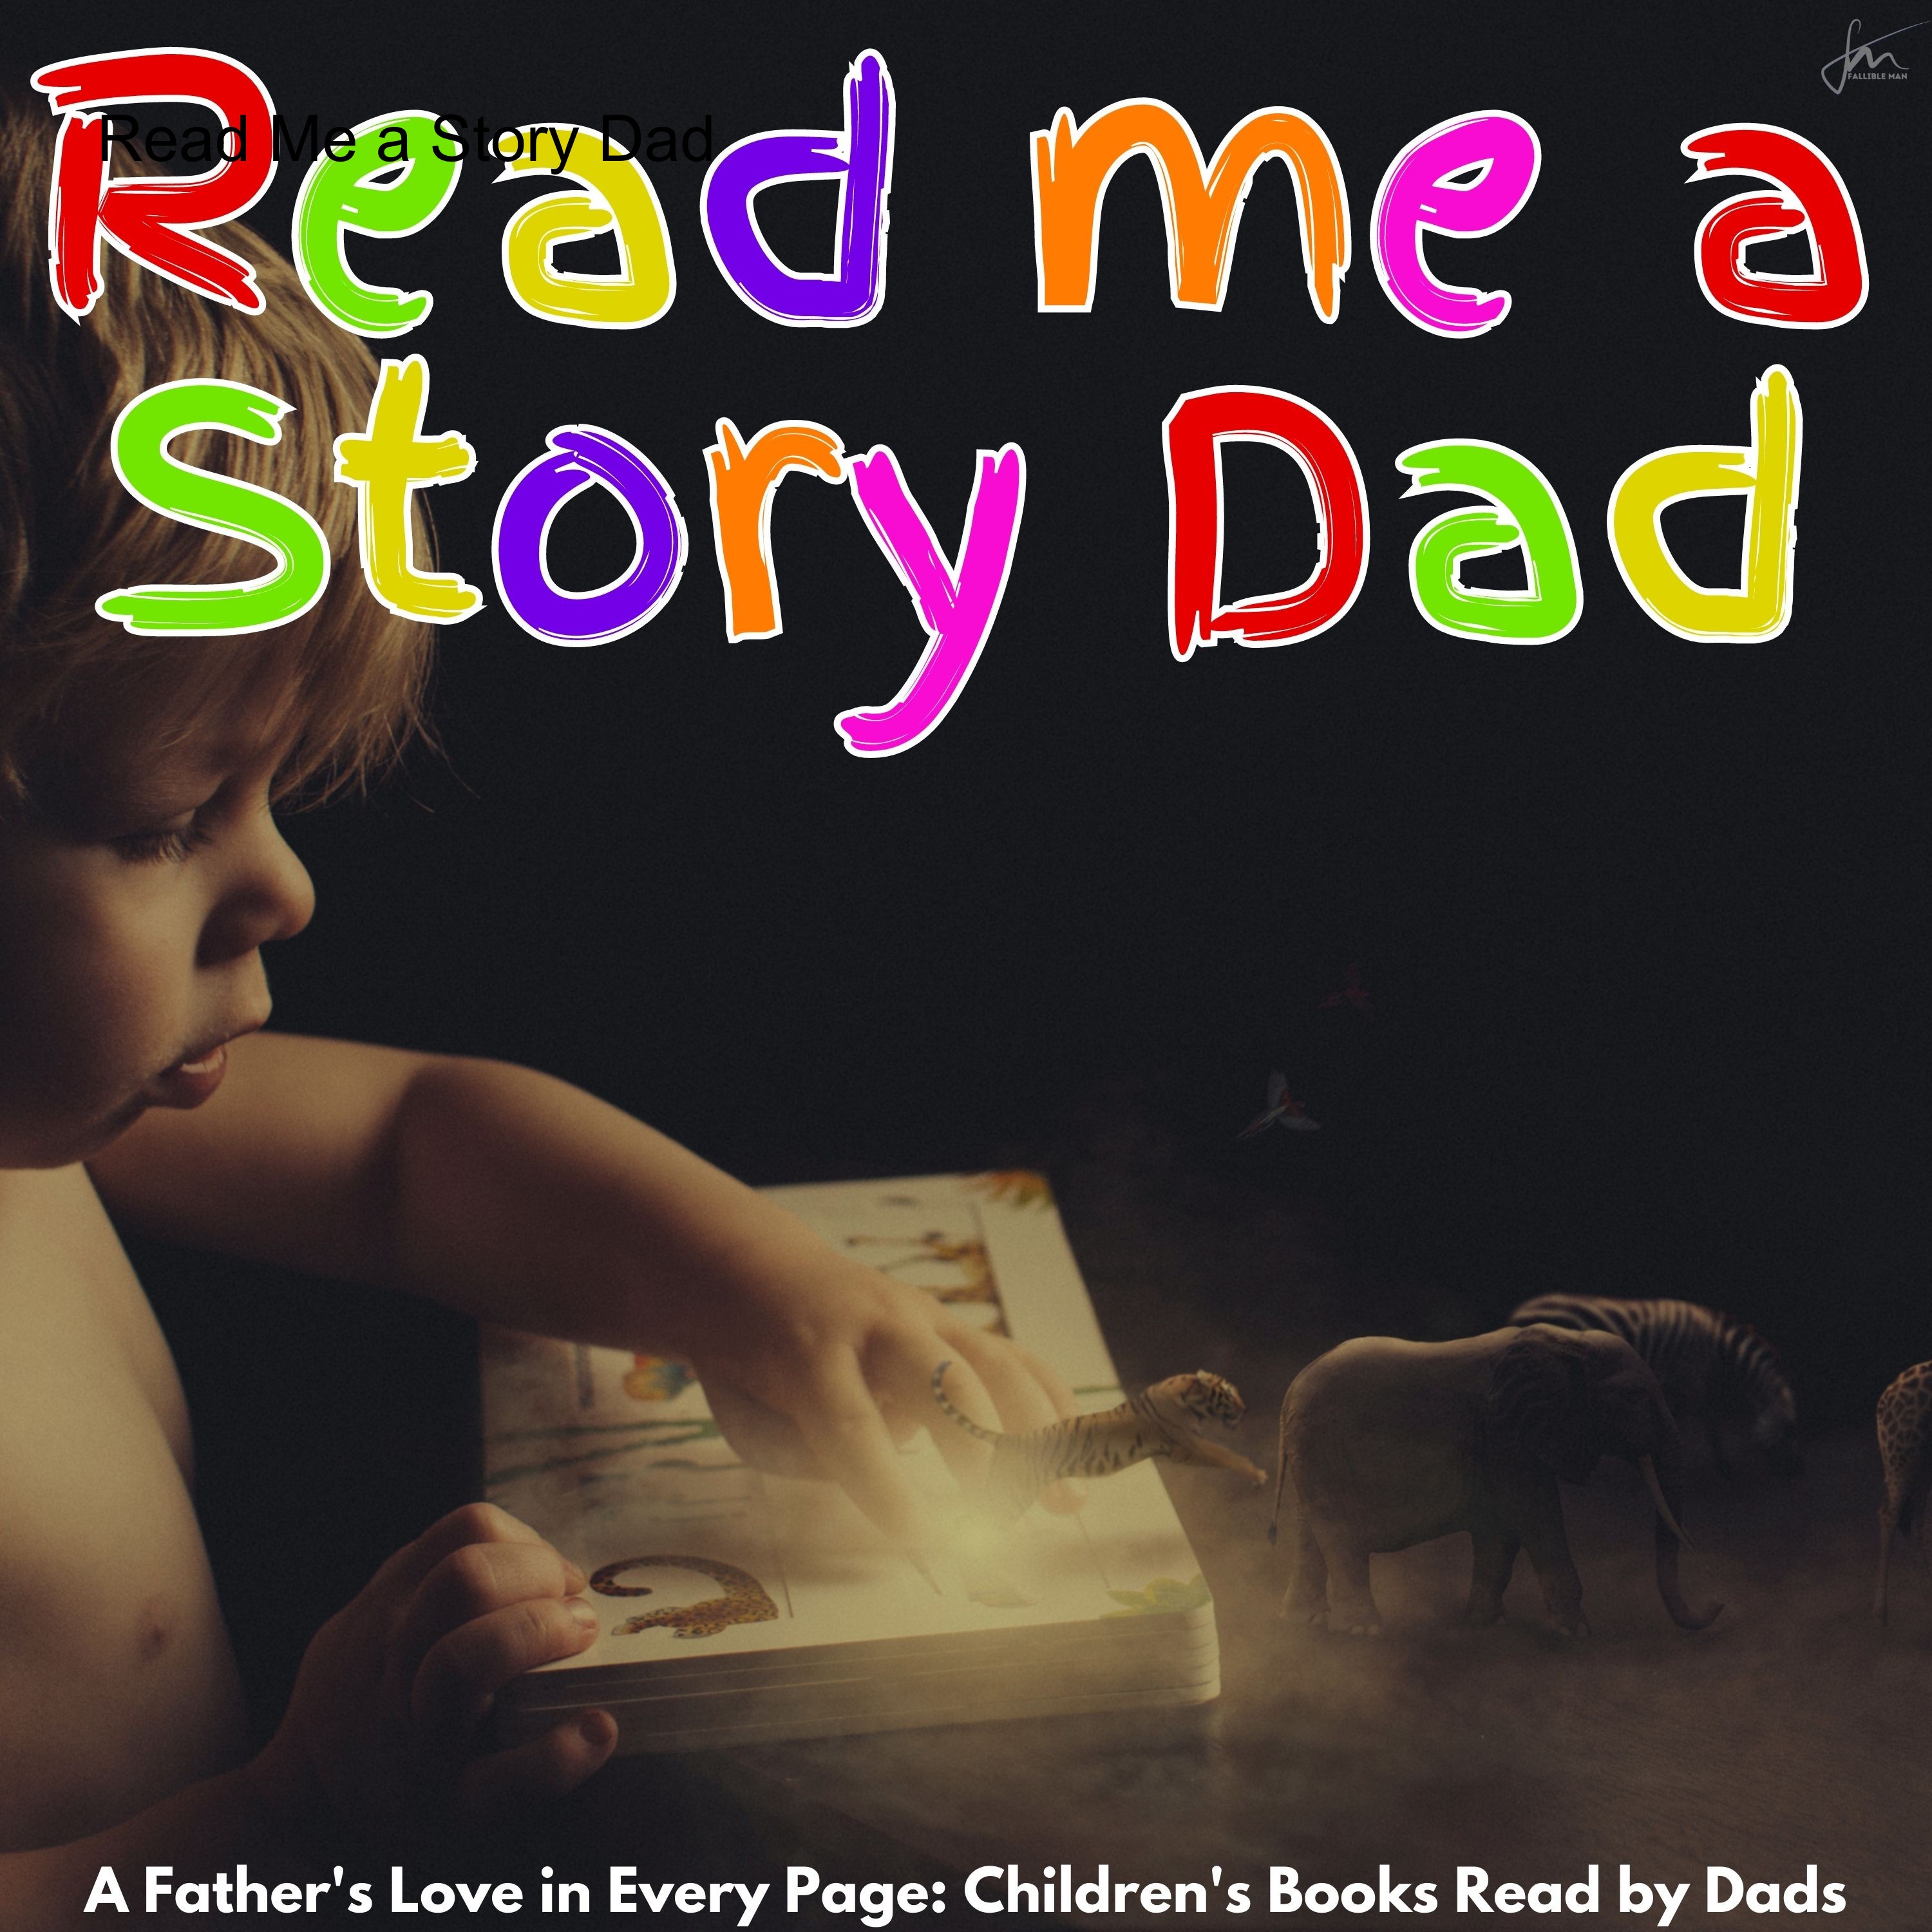 The Read Me a Story Dad Podcast